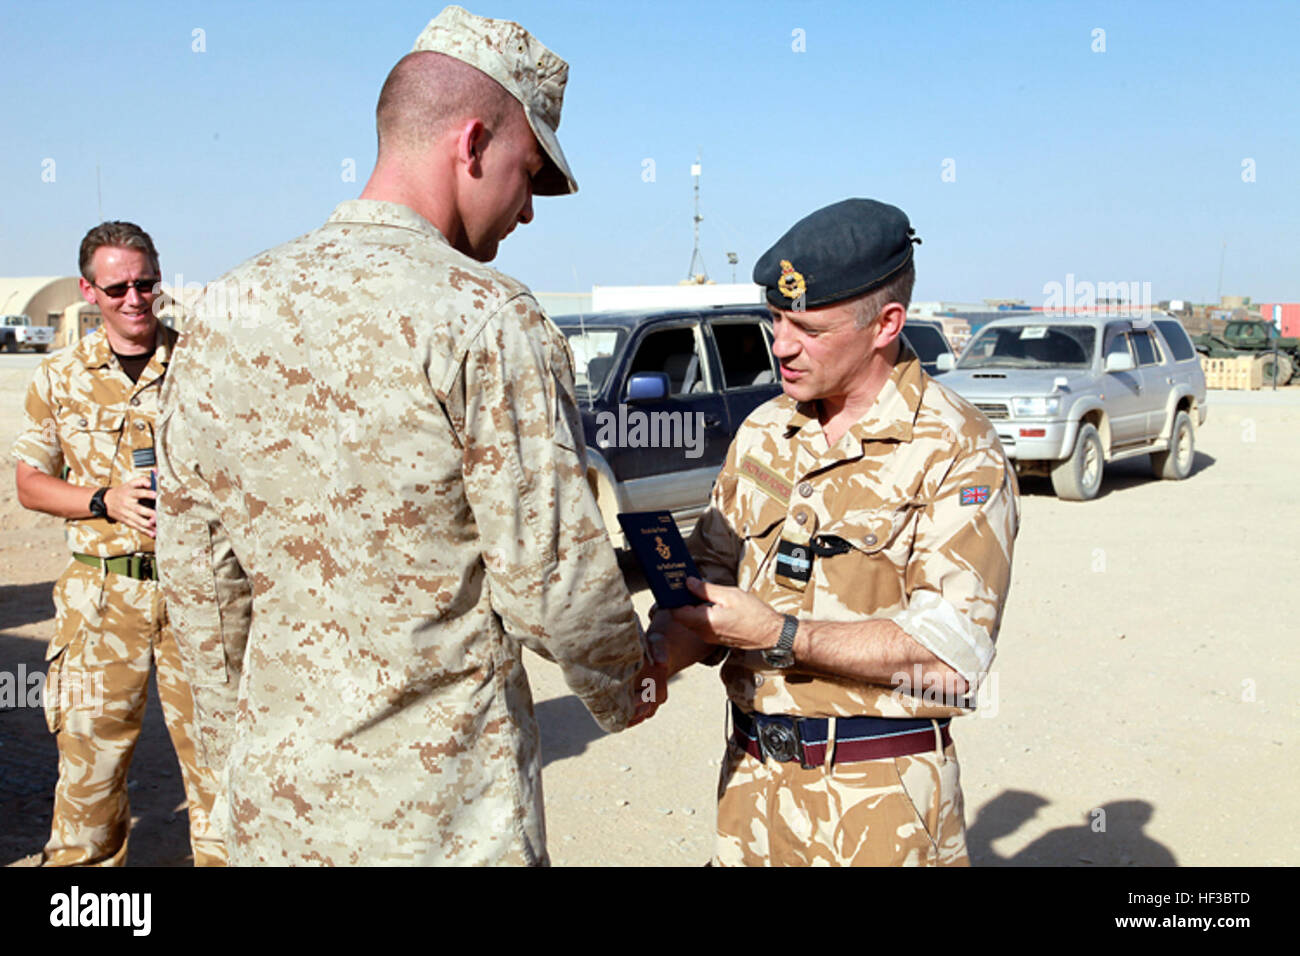 ritish Royal Air Force Air Commodore Stuart Atha, air officer commanding of the 83rd Expeditionary Air Group, presents Staff Sgt. William Chesnutt, an air traffic controller from Marine Aircraft Control Group 28, with a British Certificate of Competency for air traffic control at Camp Bastion, Helmand province, Afghanistan, Sept. 9, 2009. Chesnutt is one of the first two Marines in British aviation history to receive the certificate, also known as the Blue Book. (U.S. Marine Corps photo by Sgt. Timothy Brumley) MACG-28 Marines First to Receive British Air Traffic Control Certification DVIDS205 Stock Photo